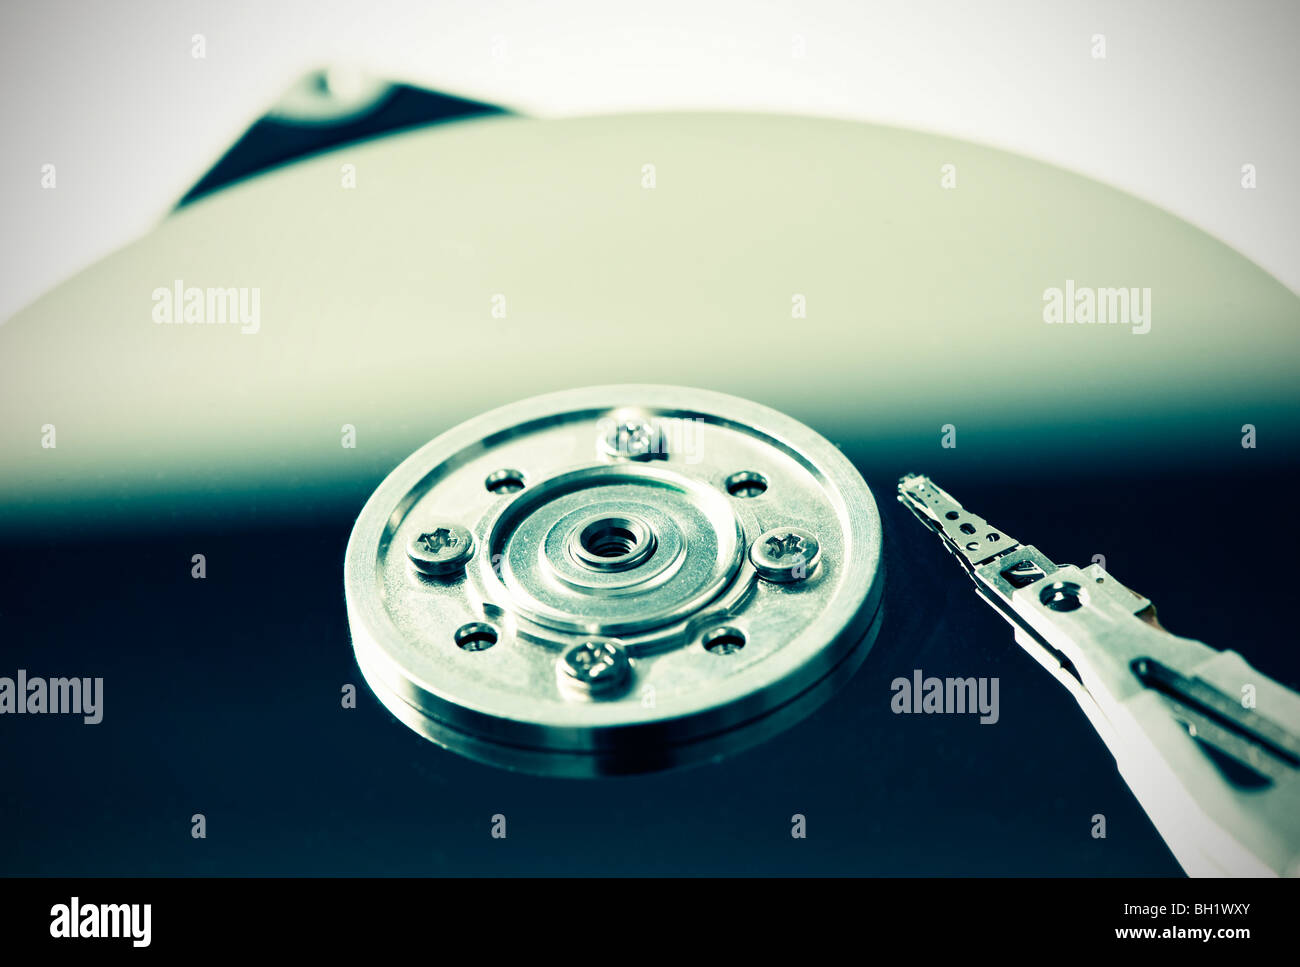 Close up of Hard Disk Drive Stock Photo